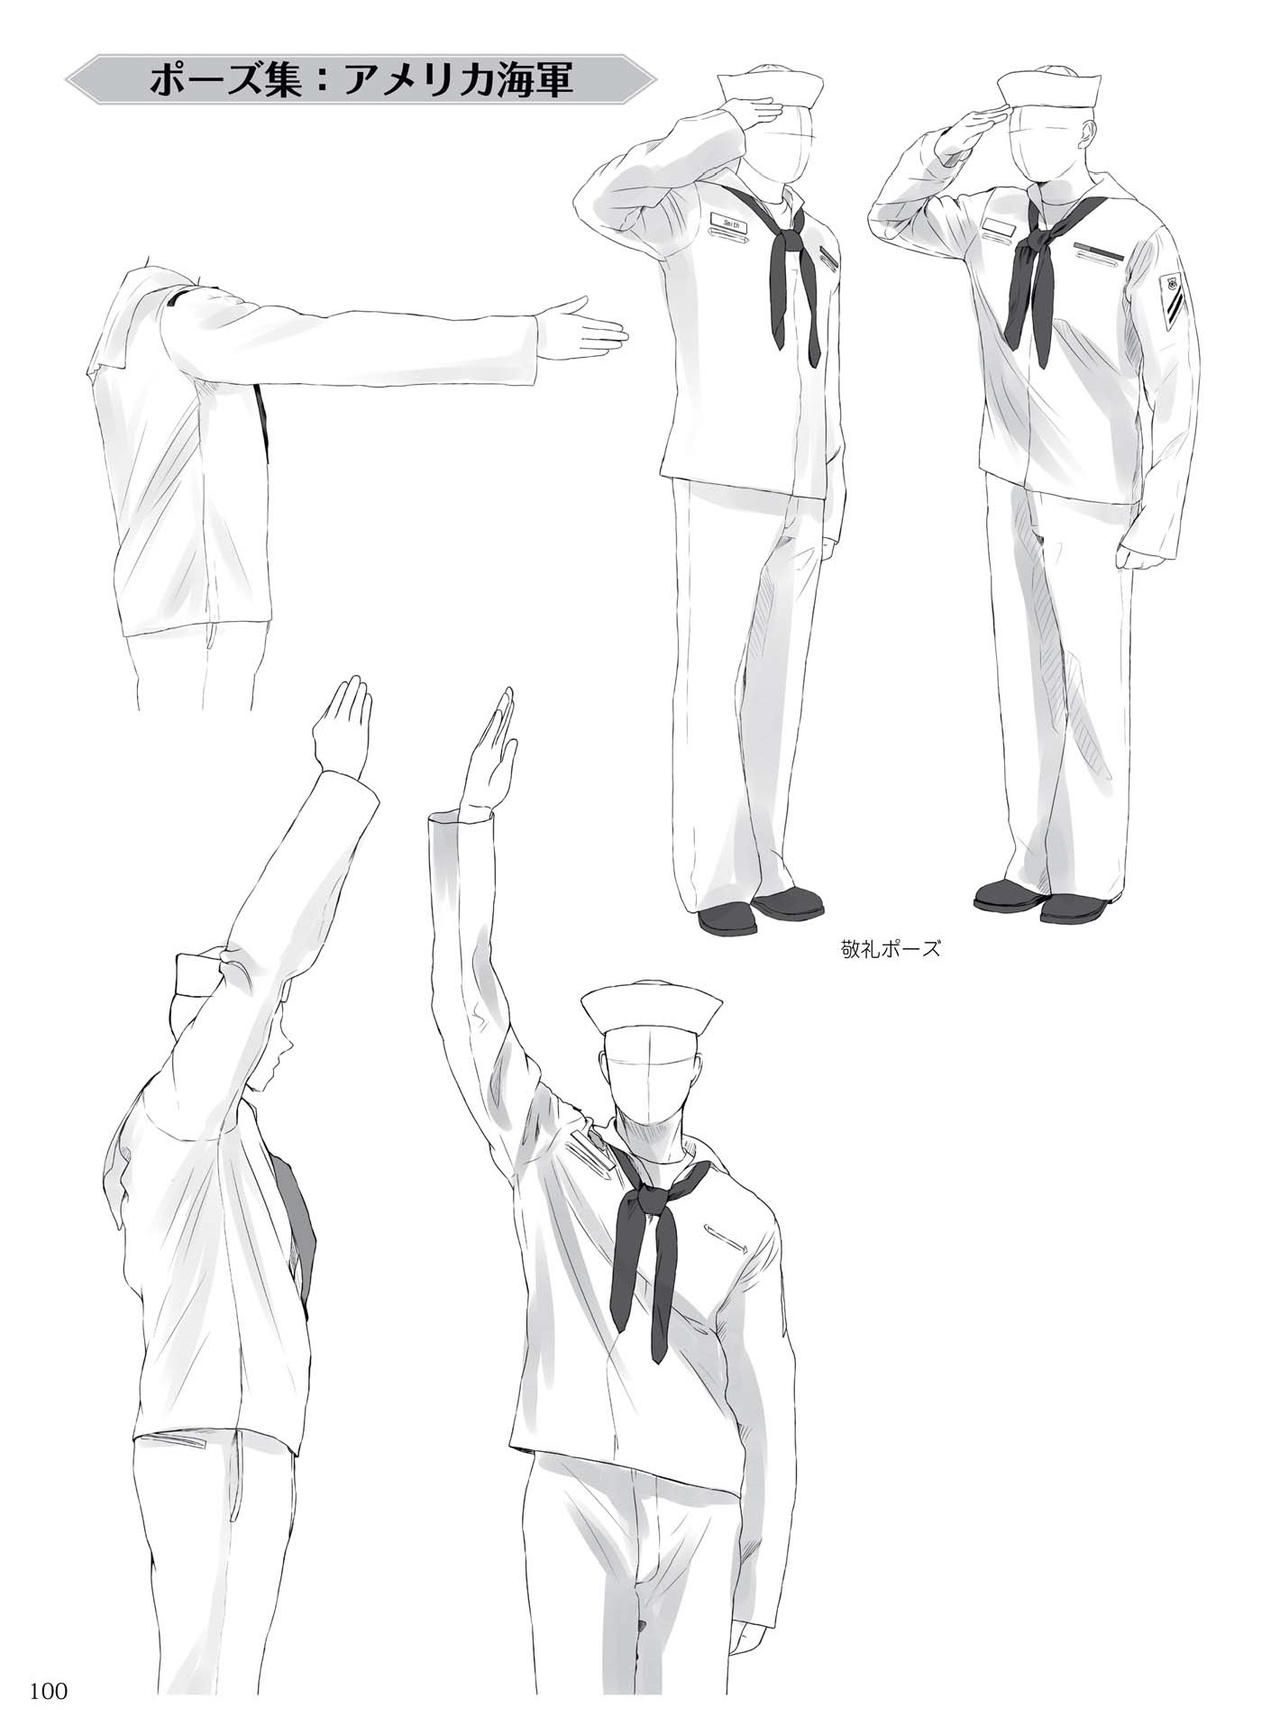 How to draw military uniforms and uniforms From Self-Defense Forces 軍服・制服の描き方 アメリカ軍・自衛隊の制服から戦闘服まで 103